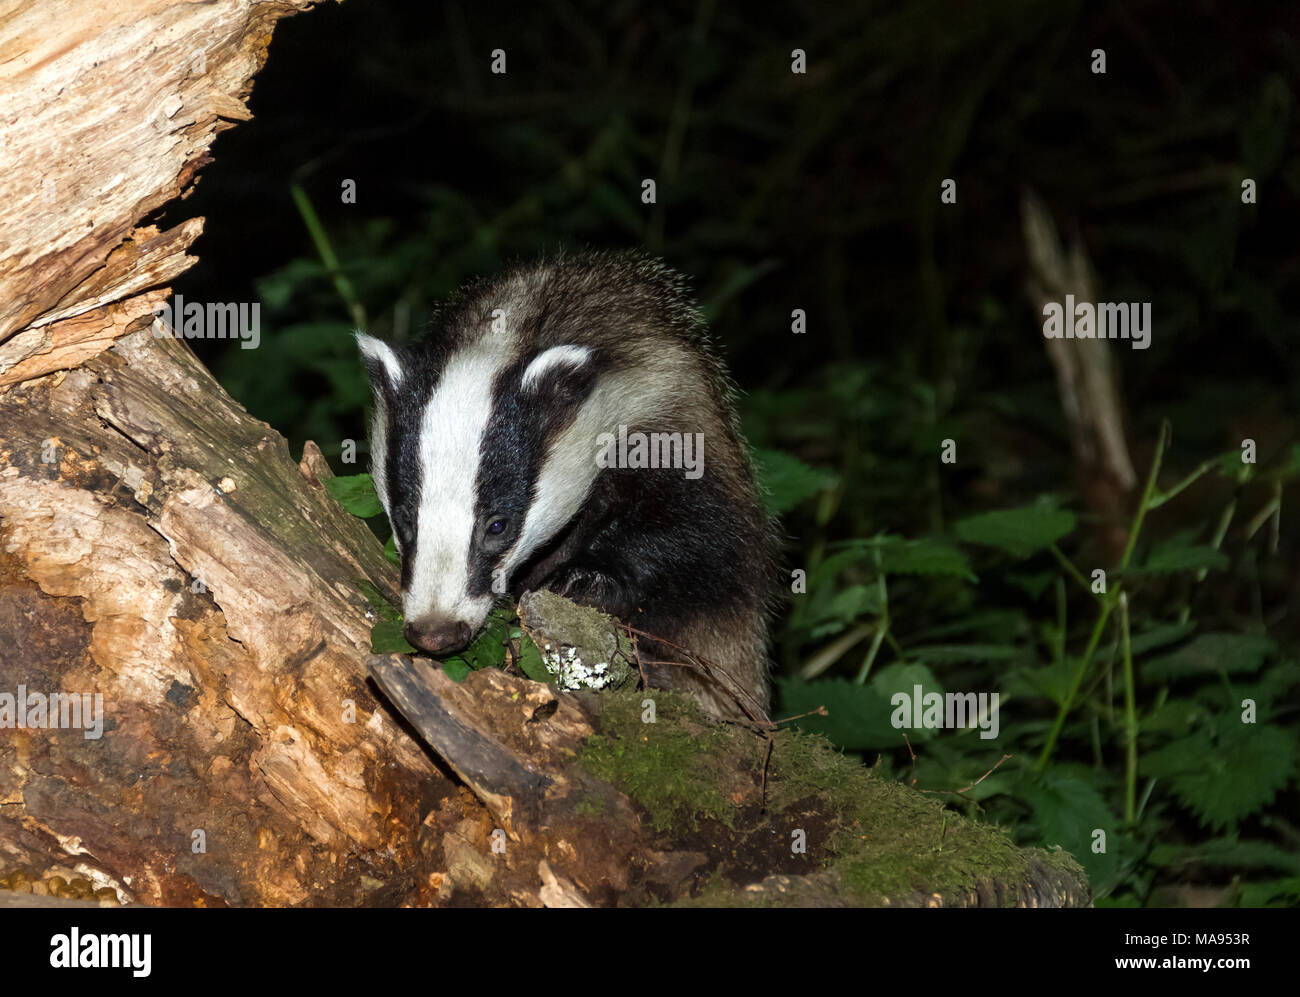 Badger, Meles Meles, reaching over a moss covered log foraging for food.  Dark background.  Landscape Stock Photo